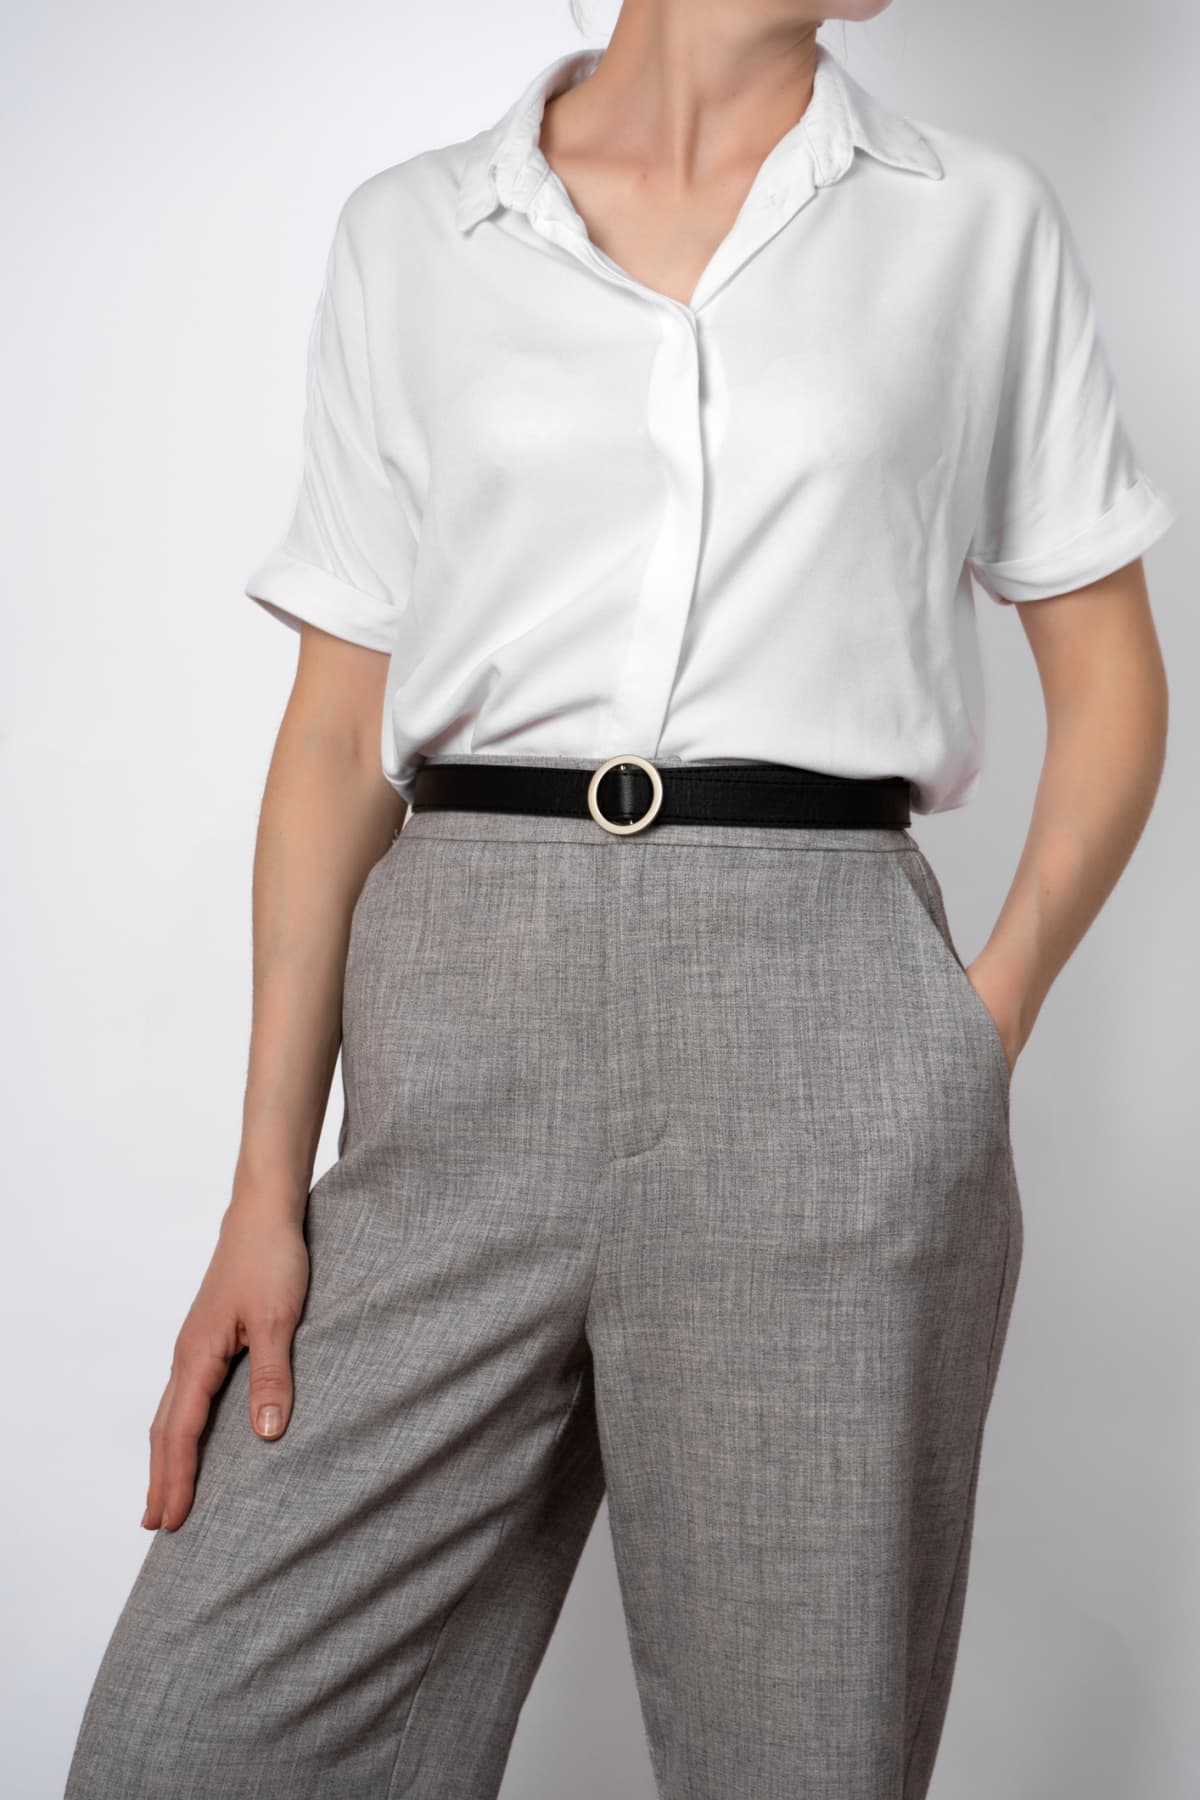 Fashionable women's casual spring outfit. woman posing in a white blouse and gray trousers. with black belt. close-up. faceless, hands in pocket, business style